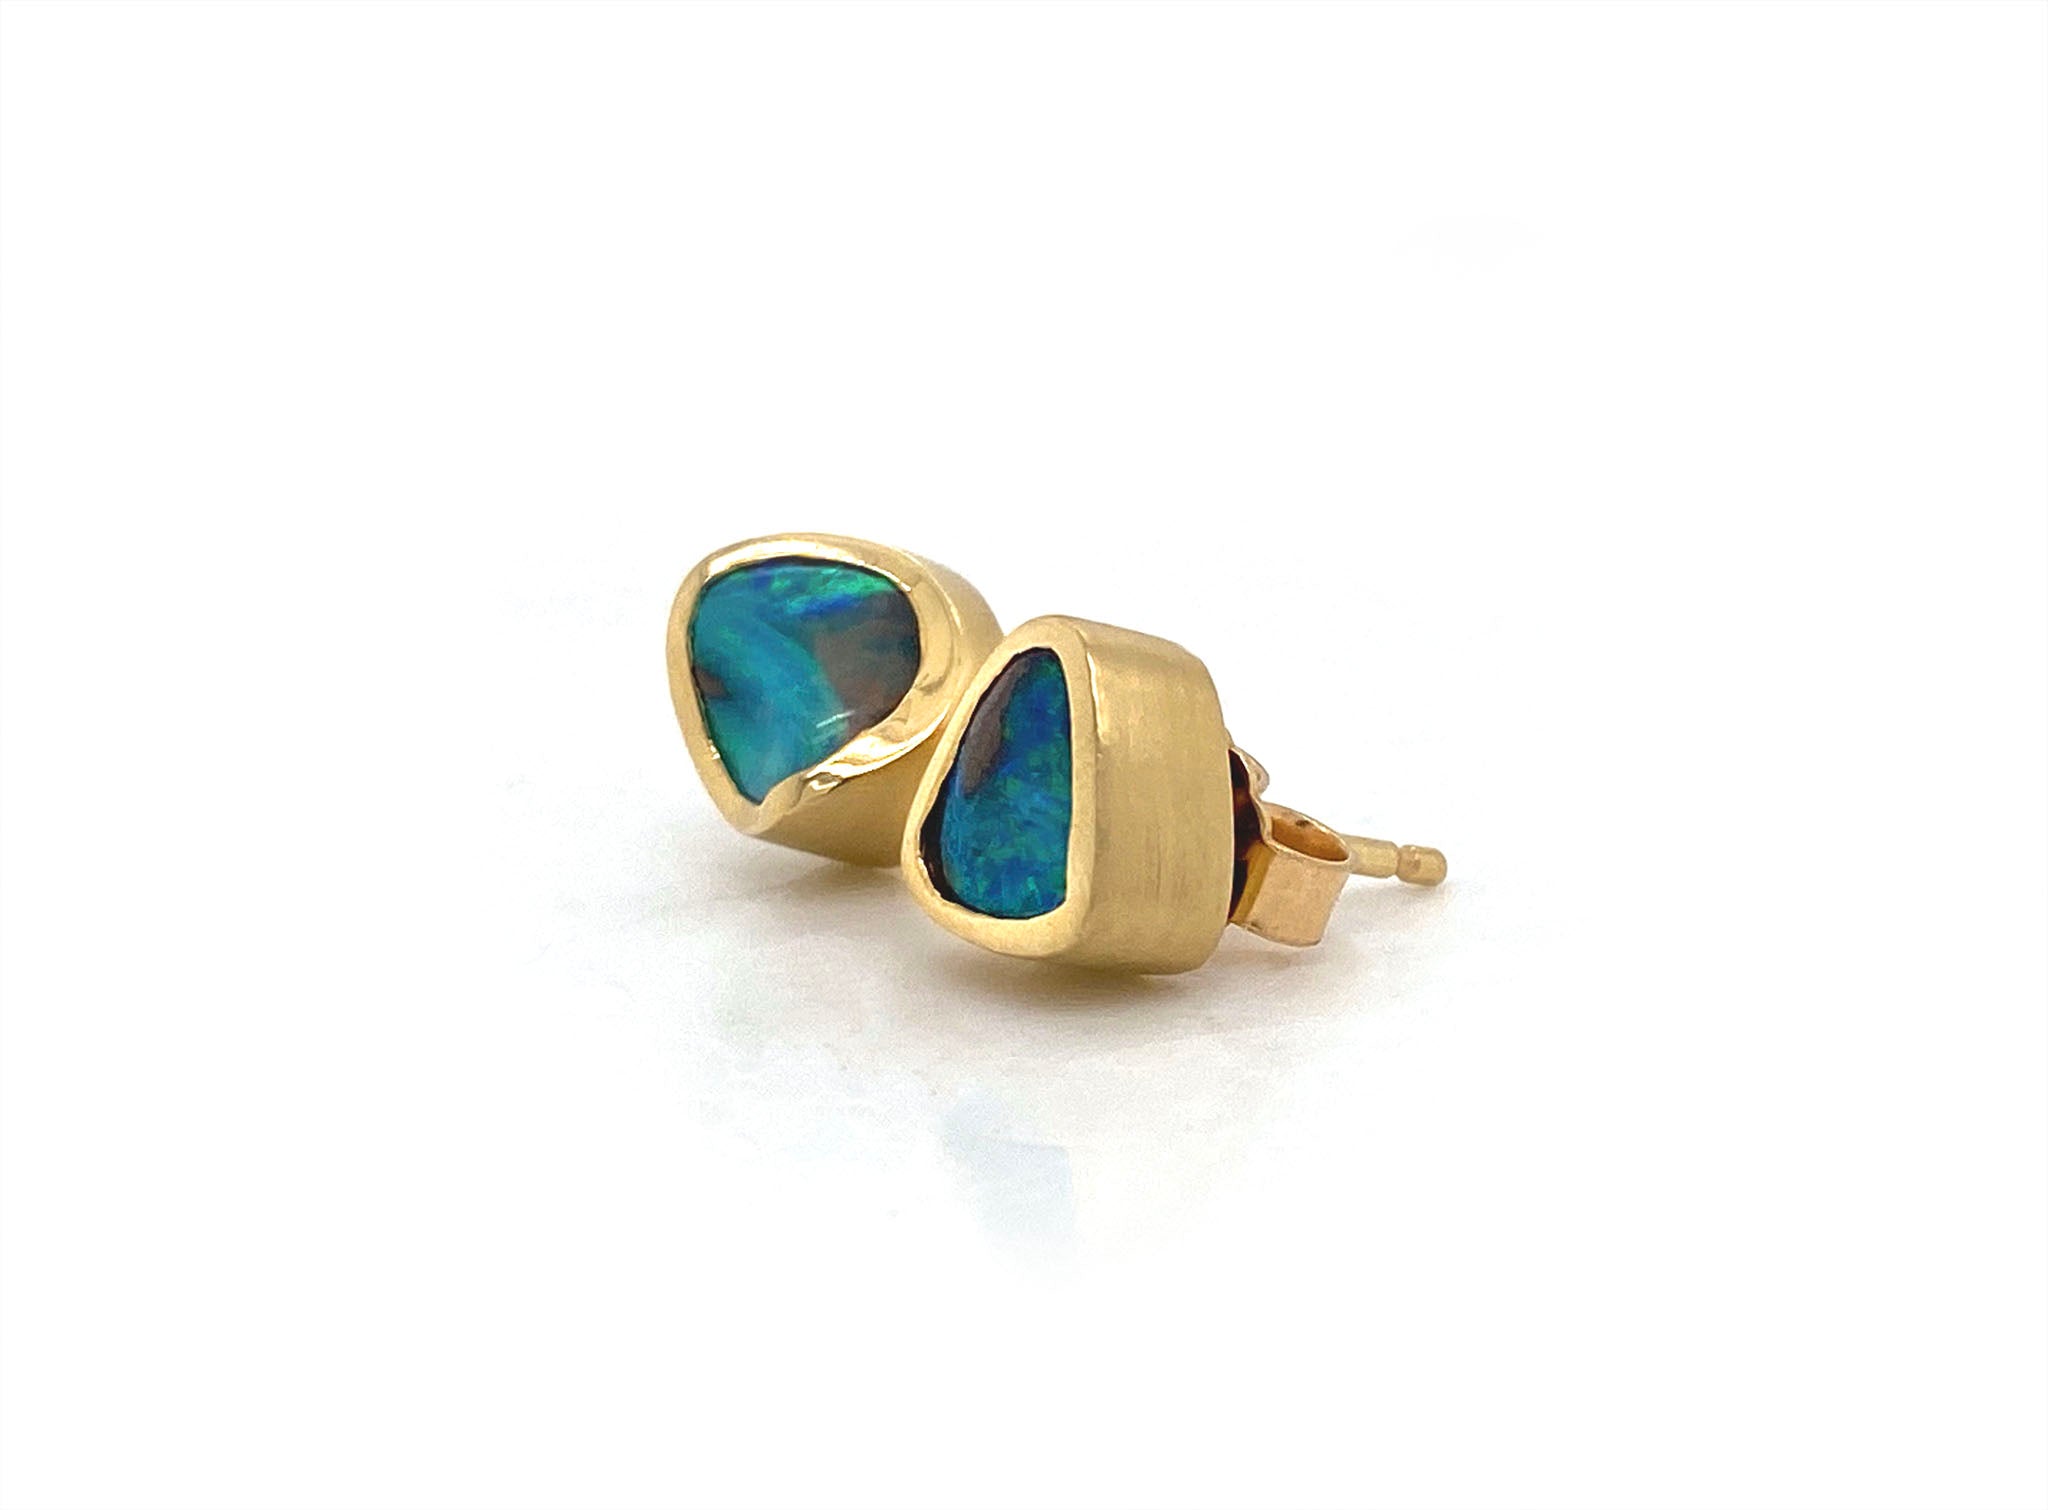 This remarkable pair of hand carved stud earrings showcases two natural Australian boulder opals with  vibrant flashes of oceanic blue and green. These exquisite gems are delicately wrapped in 18kt yellow gold with a luxurious satin finish. These opals are true works of art and will likely become a treasured family heirloom to be handed down form generation to generation. 